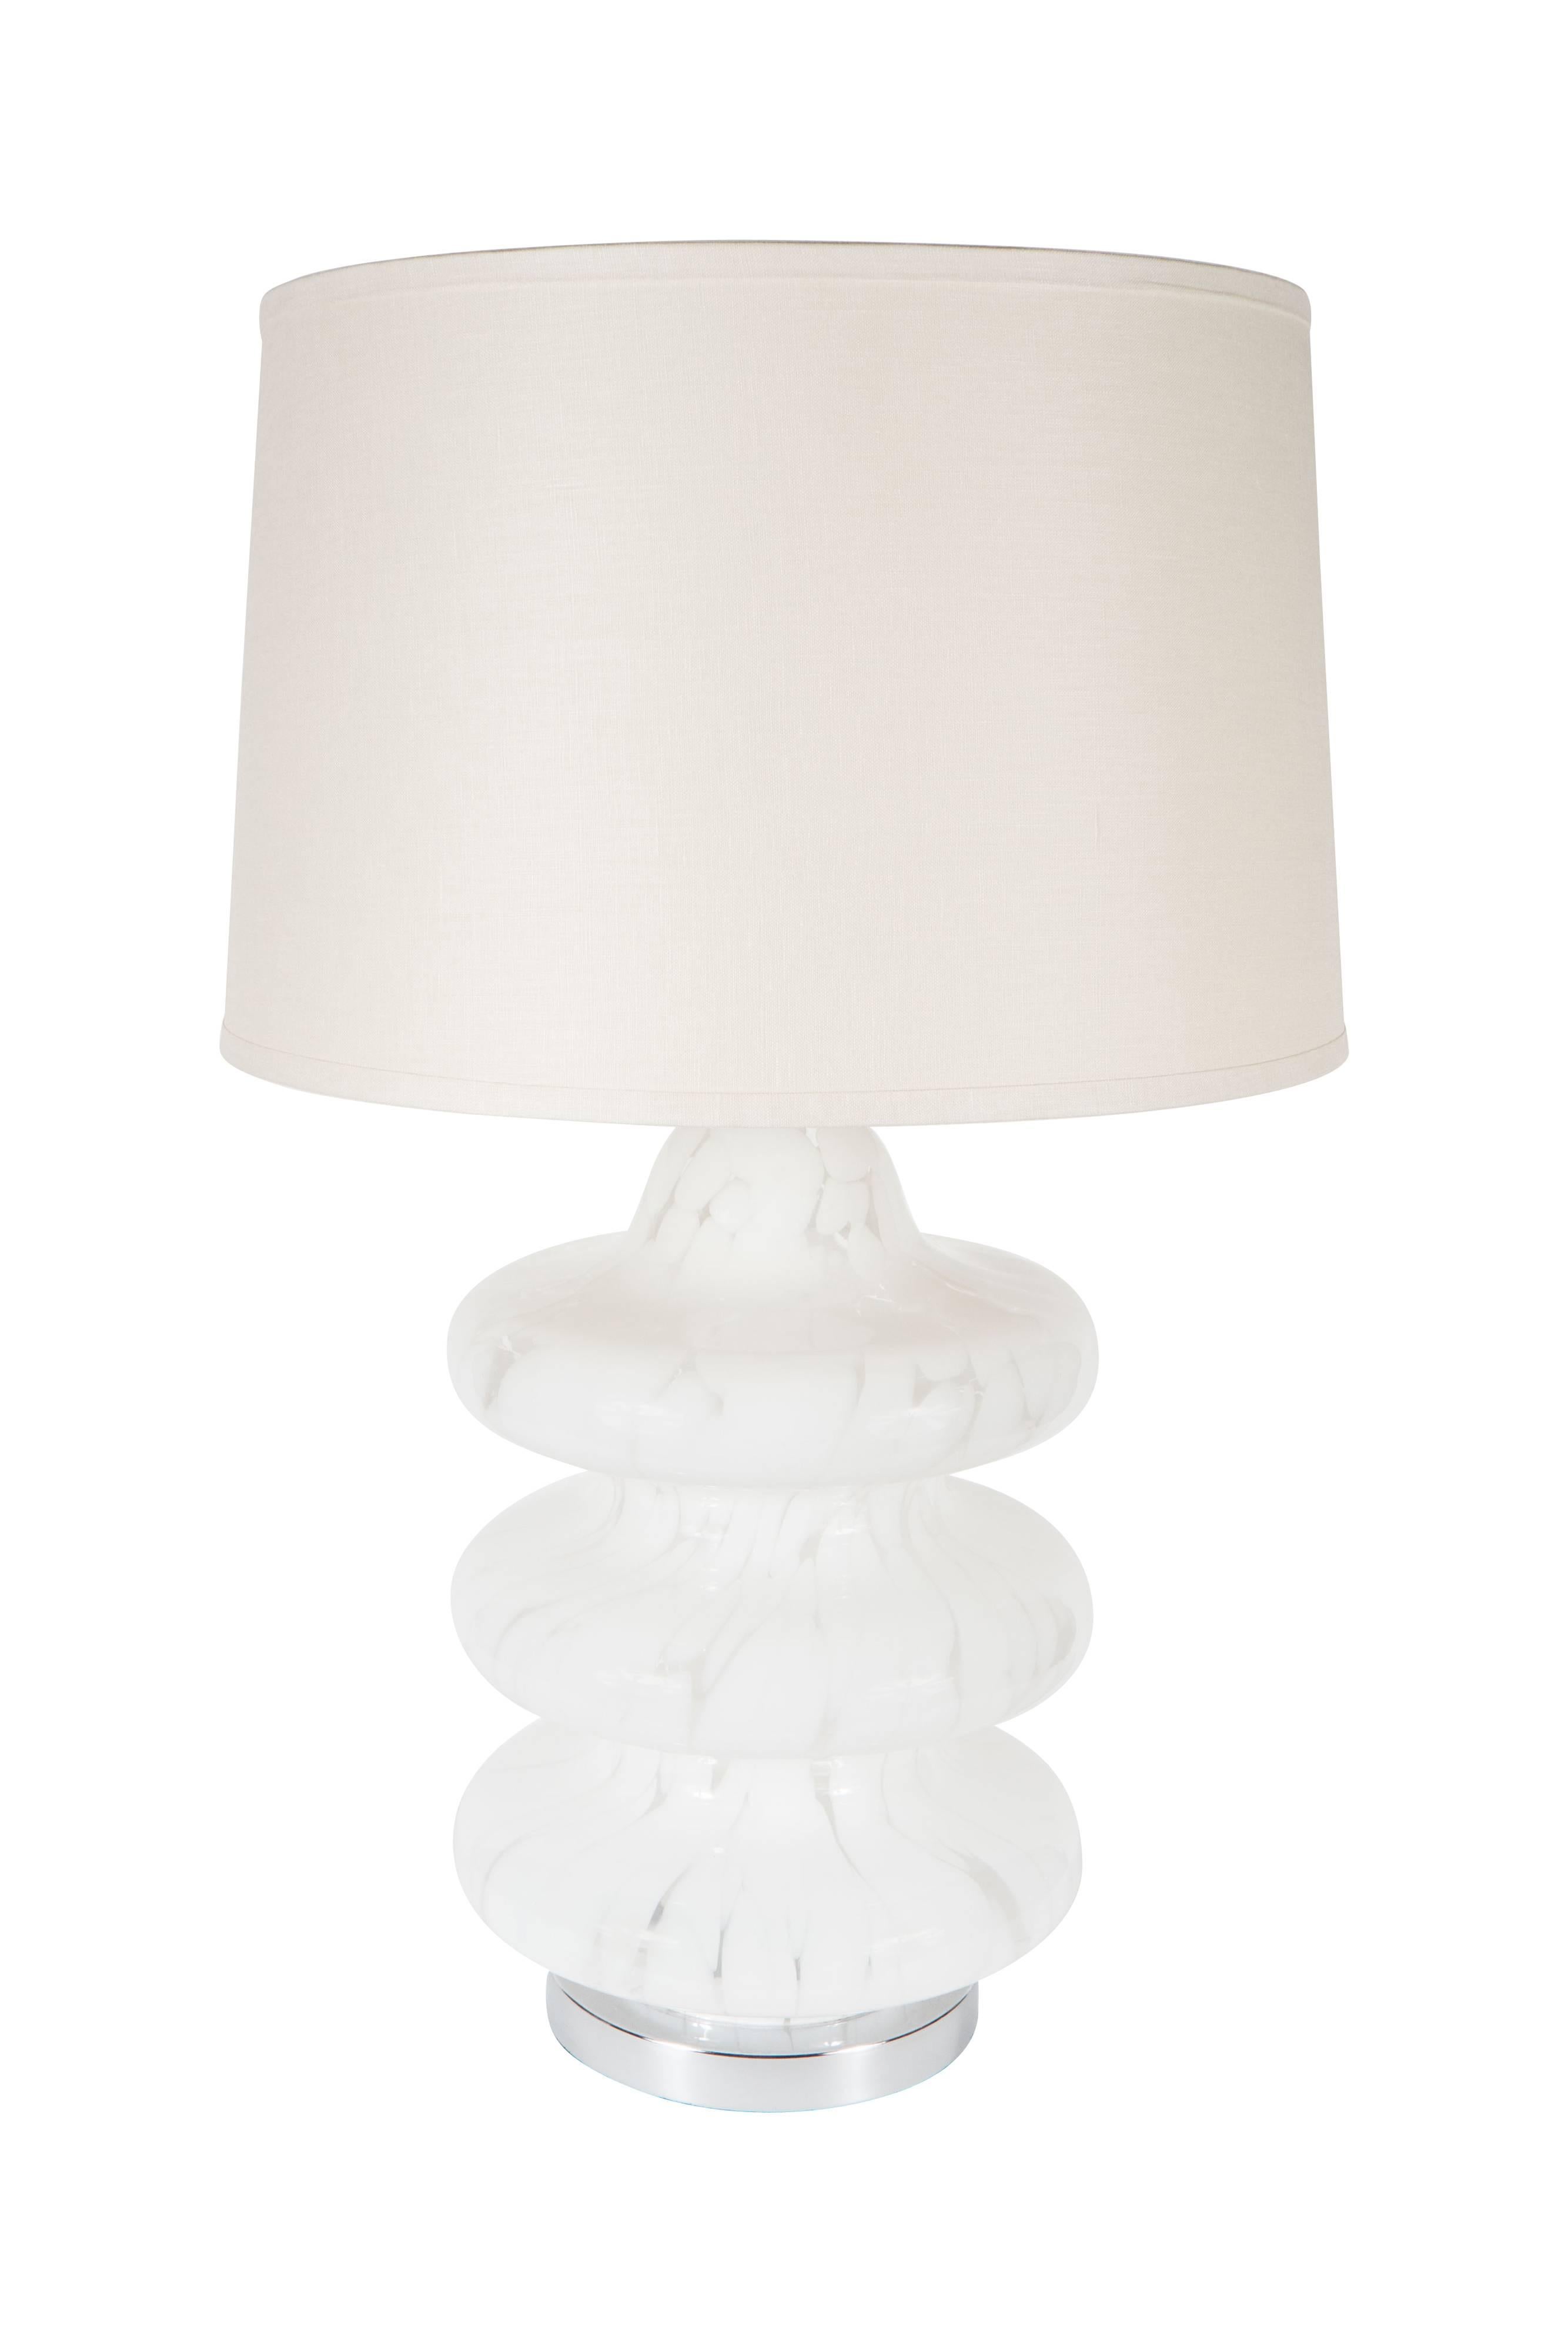 Mid-20th Century Mid-Century Mottled Frosted and Satin Murano TOTEM Table Lamp by Vistosi